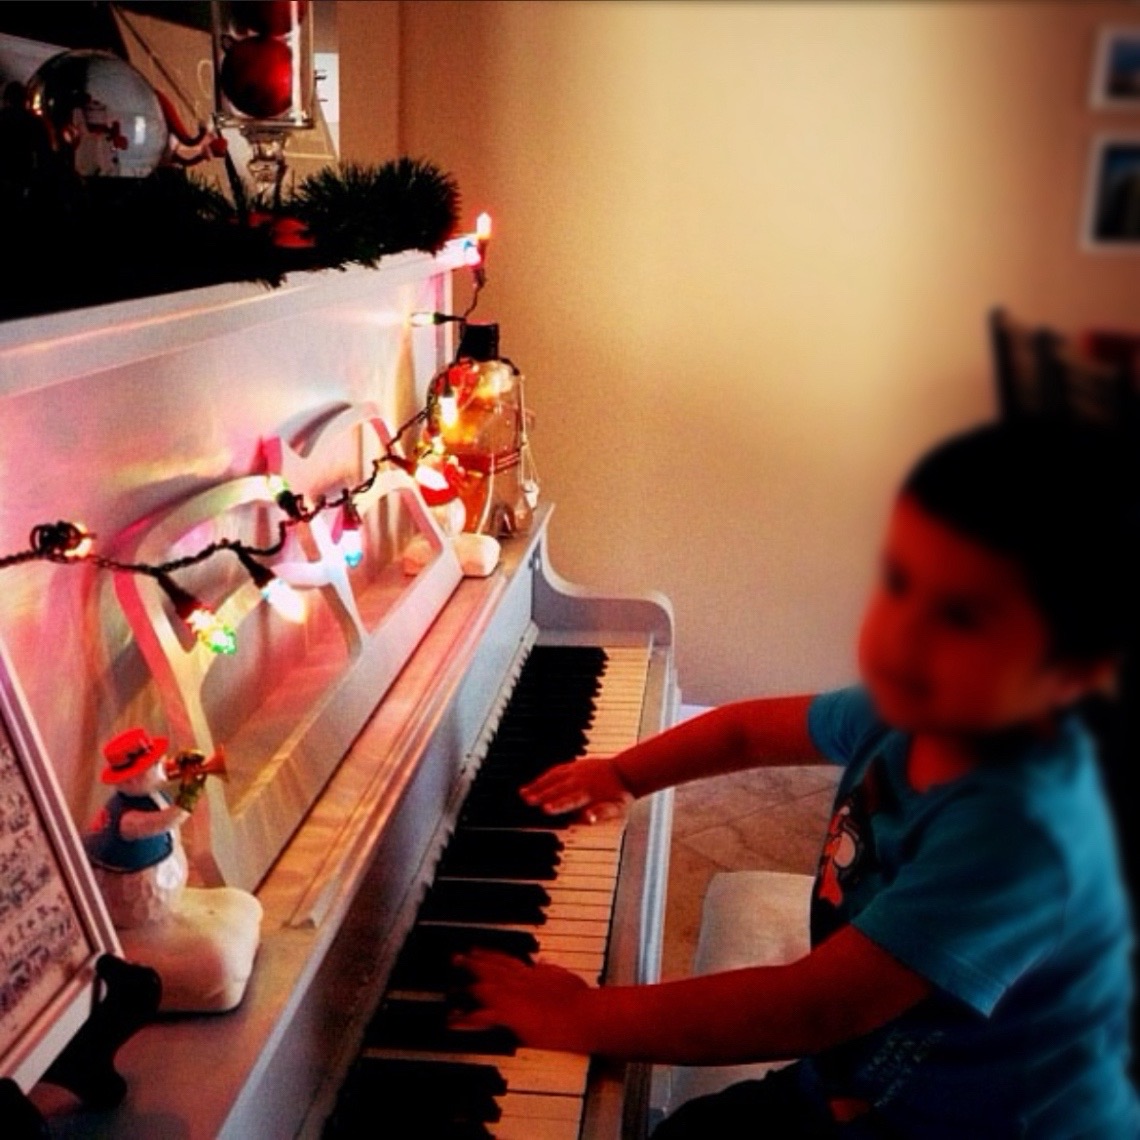 Aesthetically blurry image of a toddler playing the piano underneath the Christmas lights